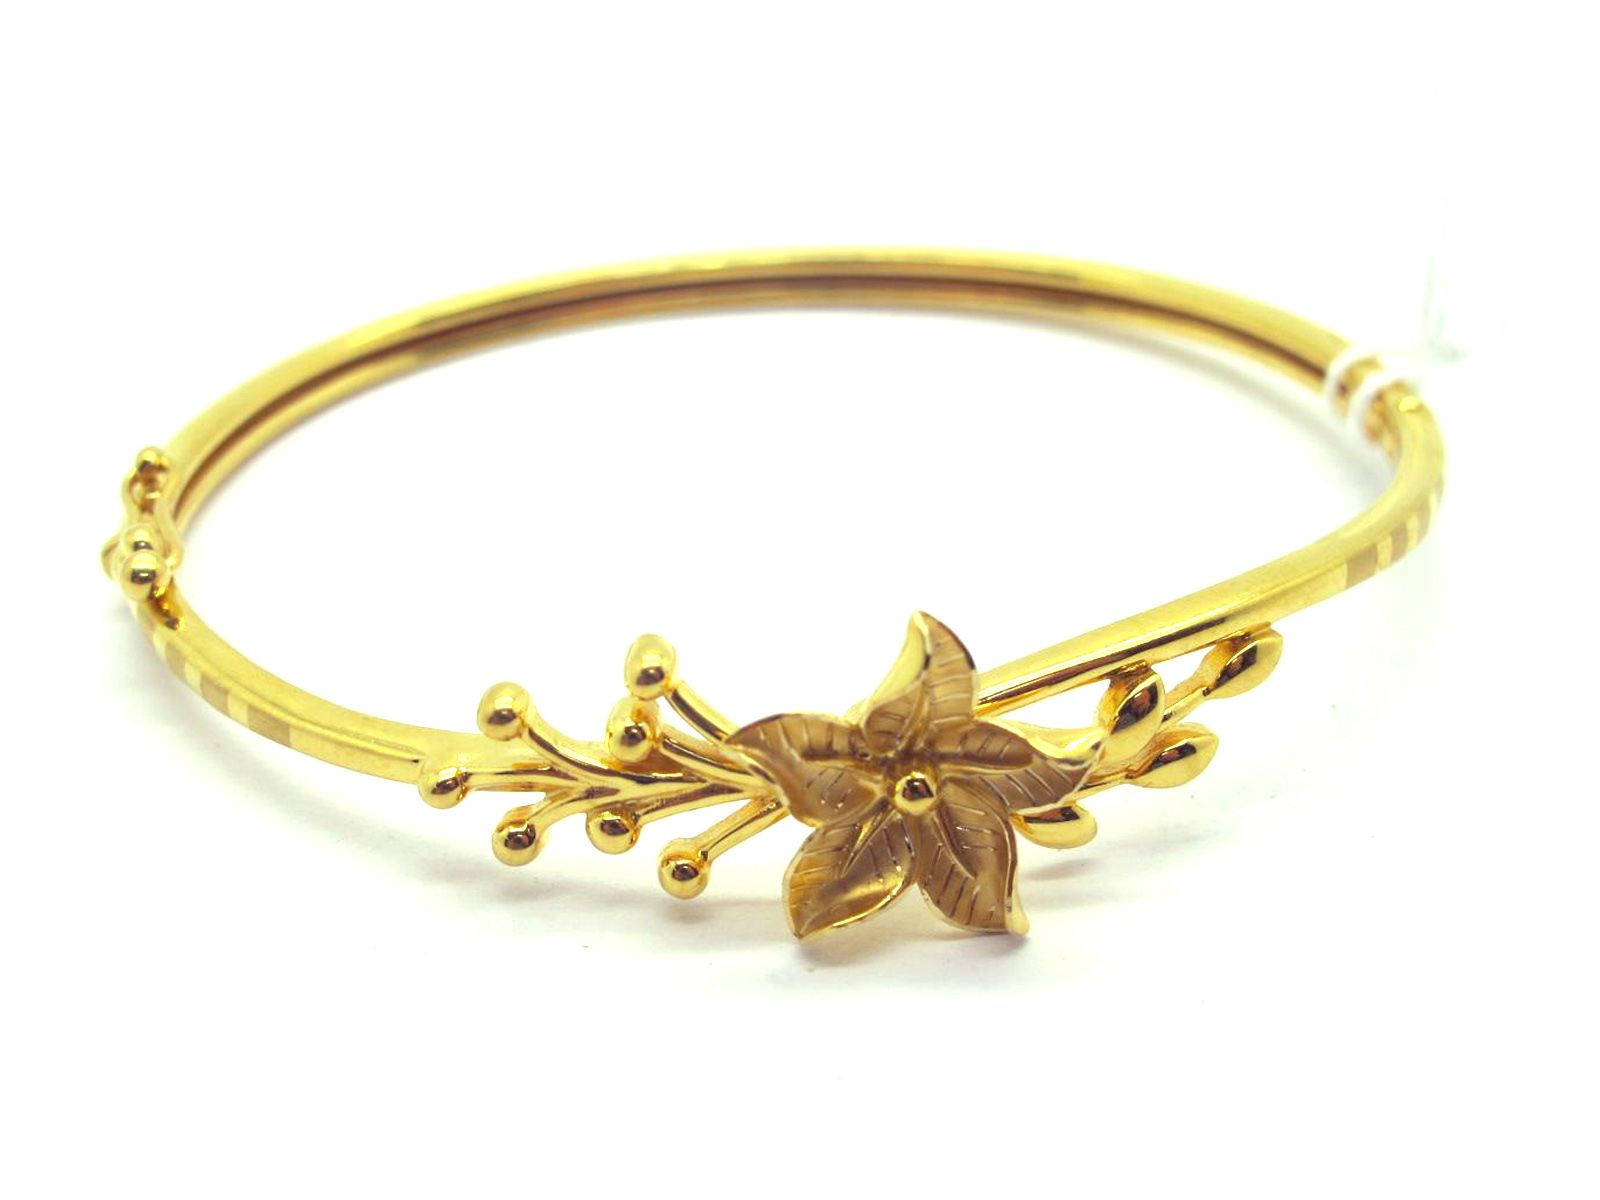 A Modern Hinged Bangle, with central flowerhead detail, hinged to snap clasp, stamped "KD 750